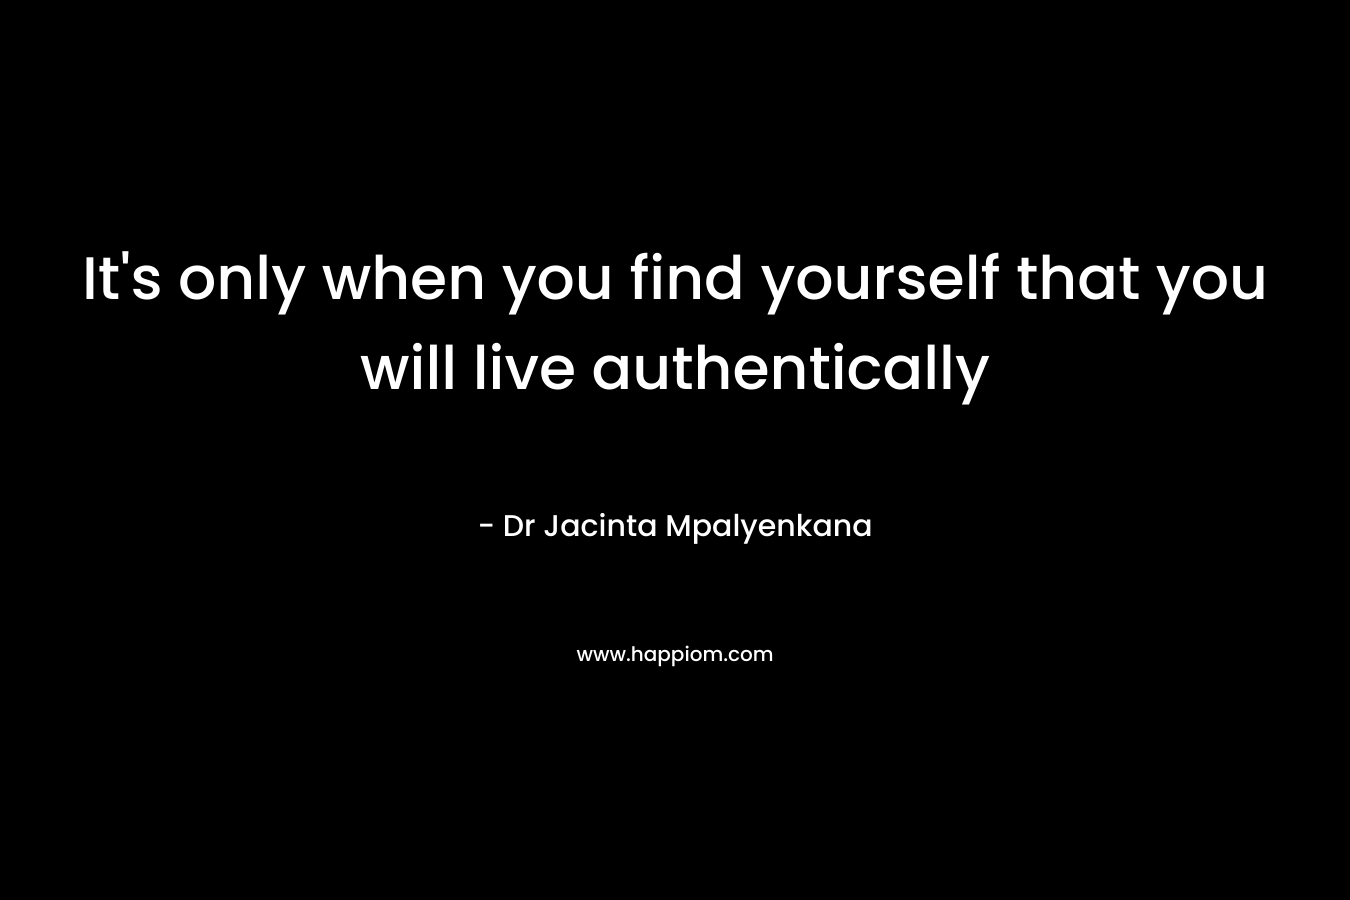 It's only when you find yourself that you will live authentically